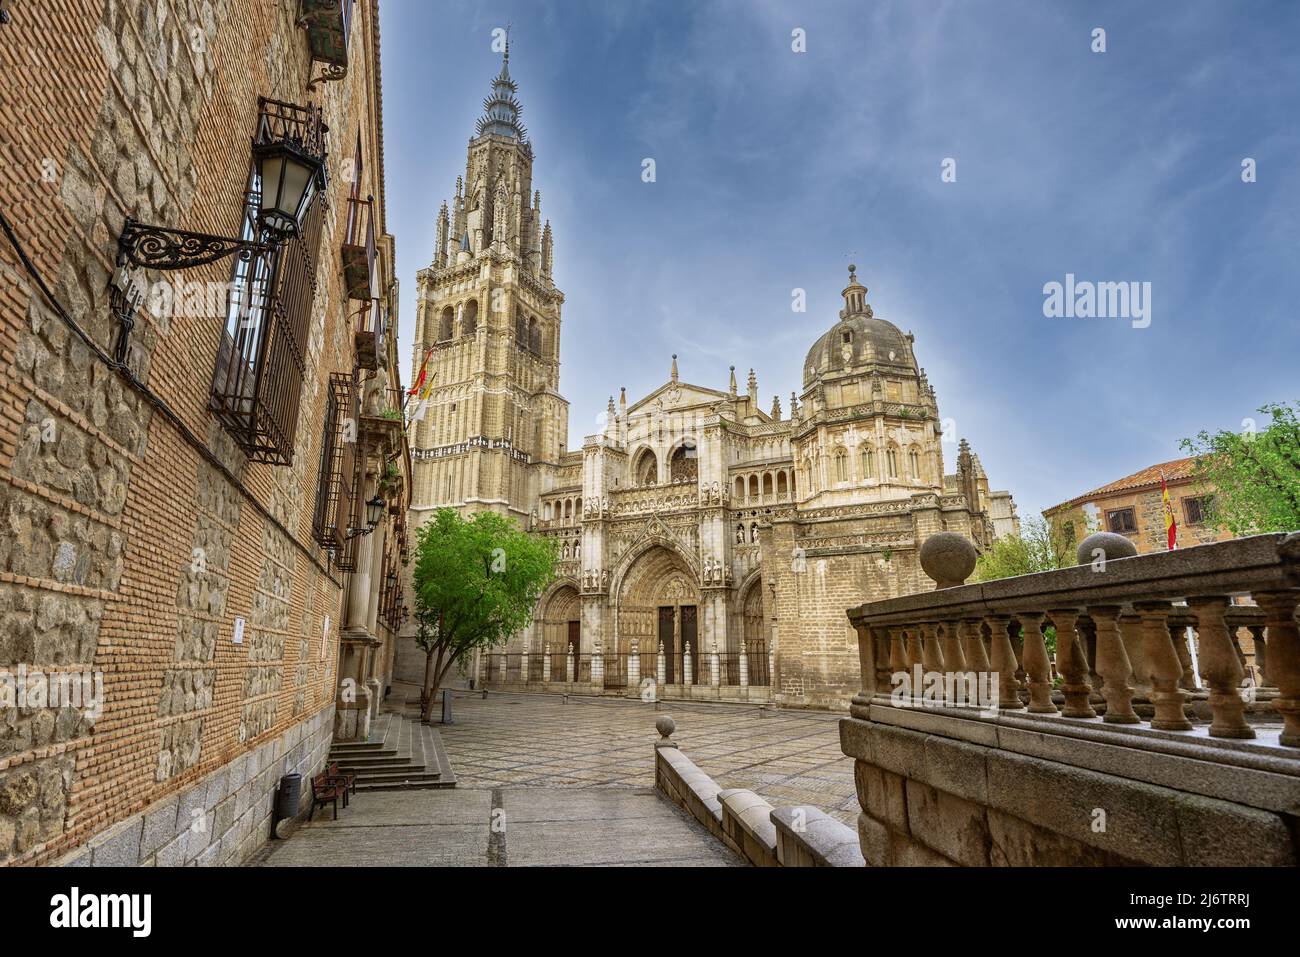 View of Catedral de Toledo famous religious monument in Spain Stock Photo